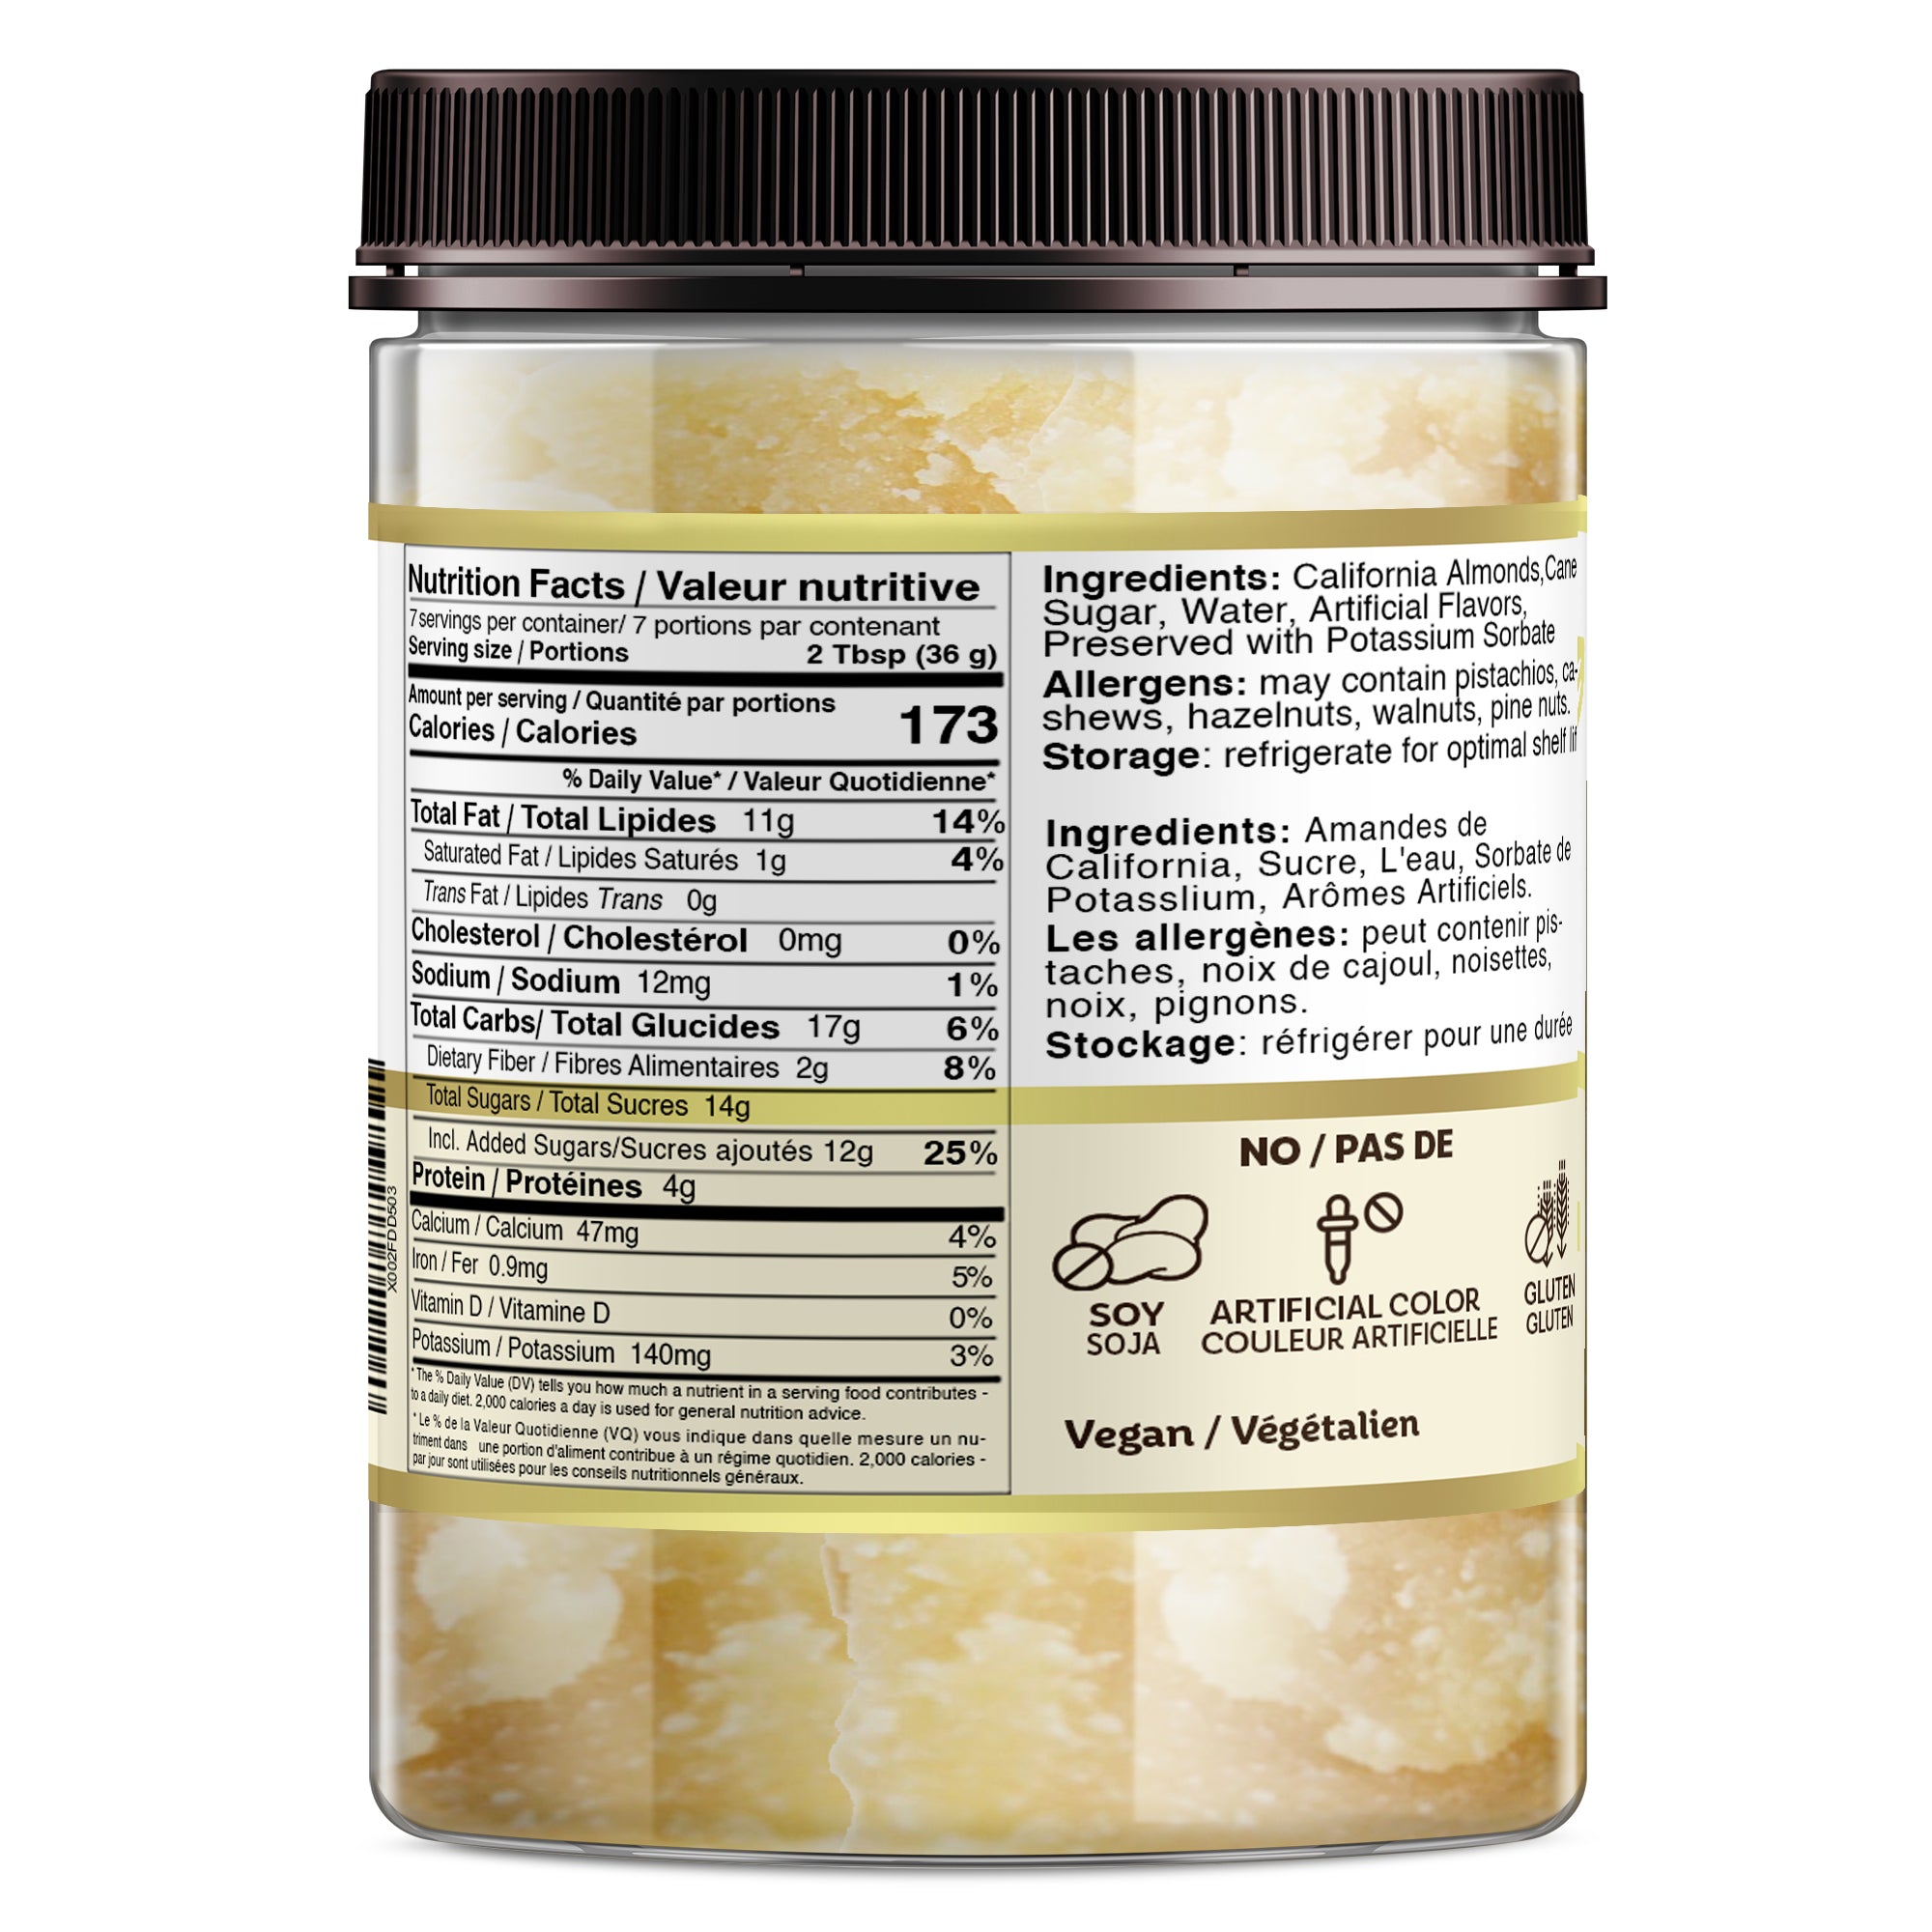 Cocoläat European Style Almond Paste | Sweetened For Flavouring & Pastry Filling | Premium California Almonds | 10 oz/284 g Resealable Jar